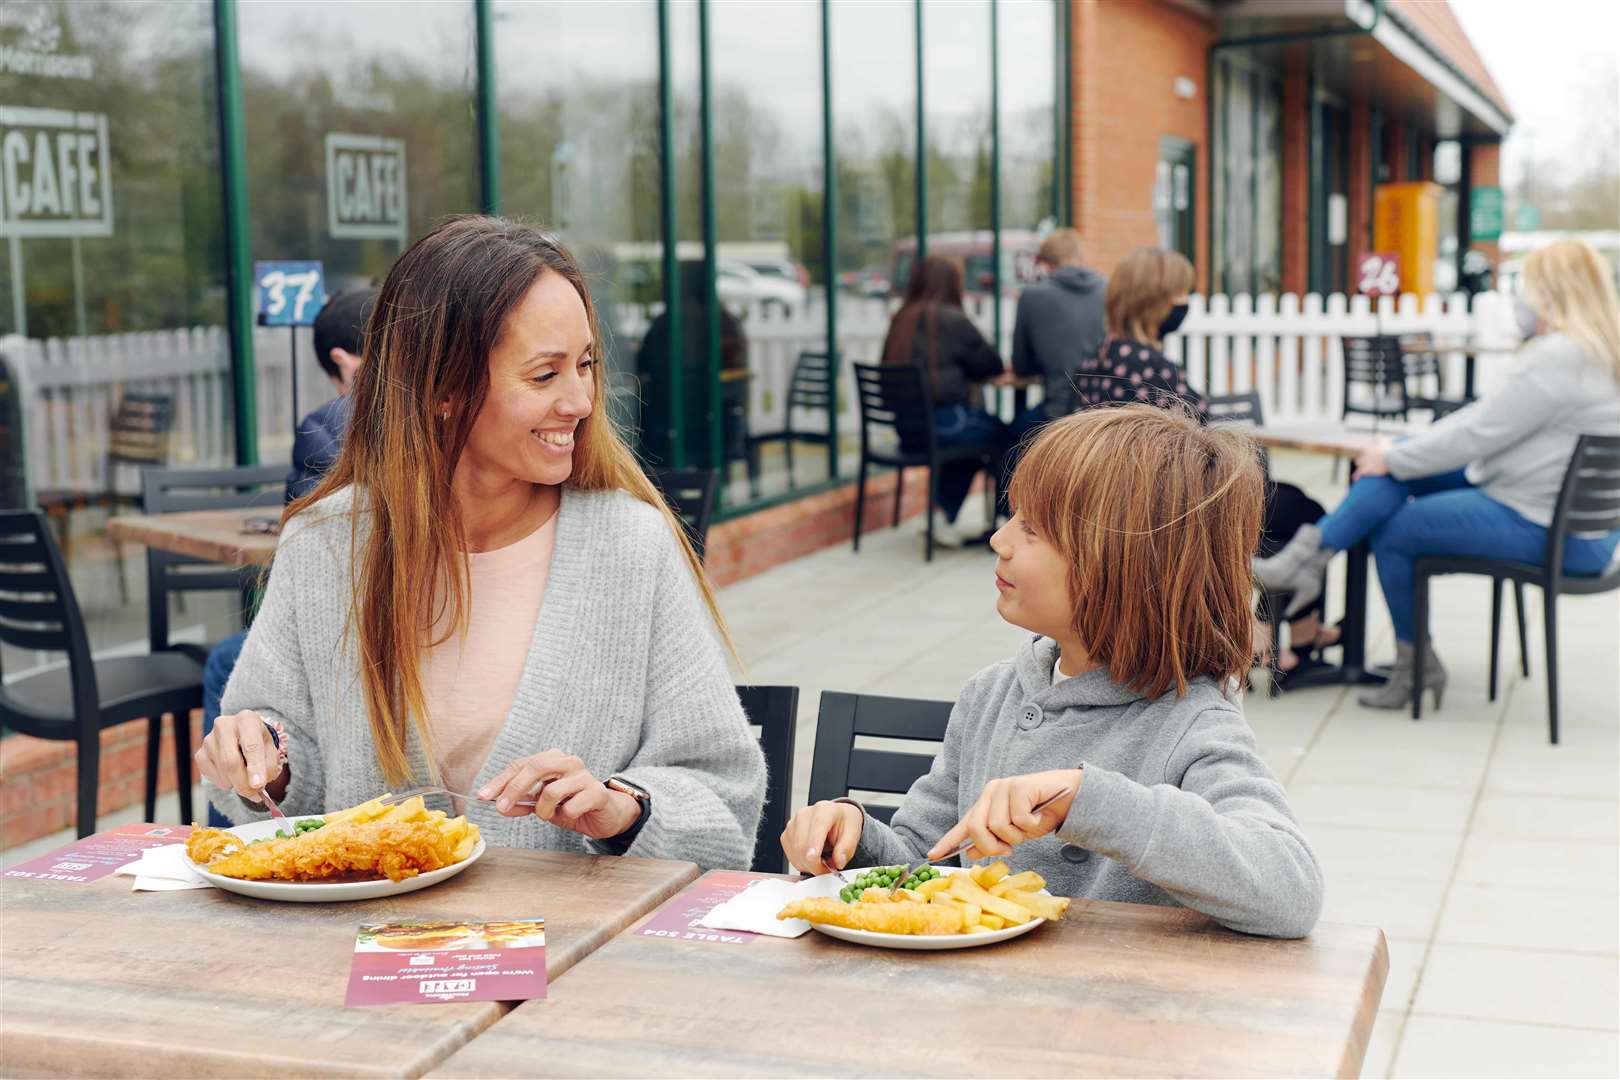 Morrisons cafés say four family members can eat for less than £10